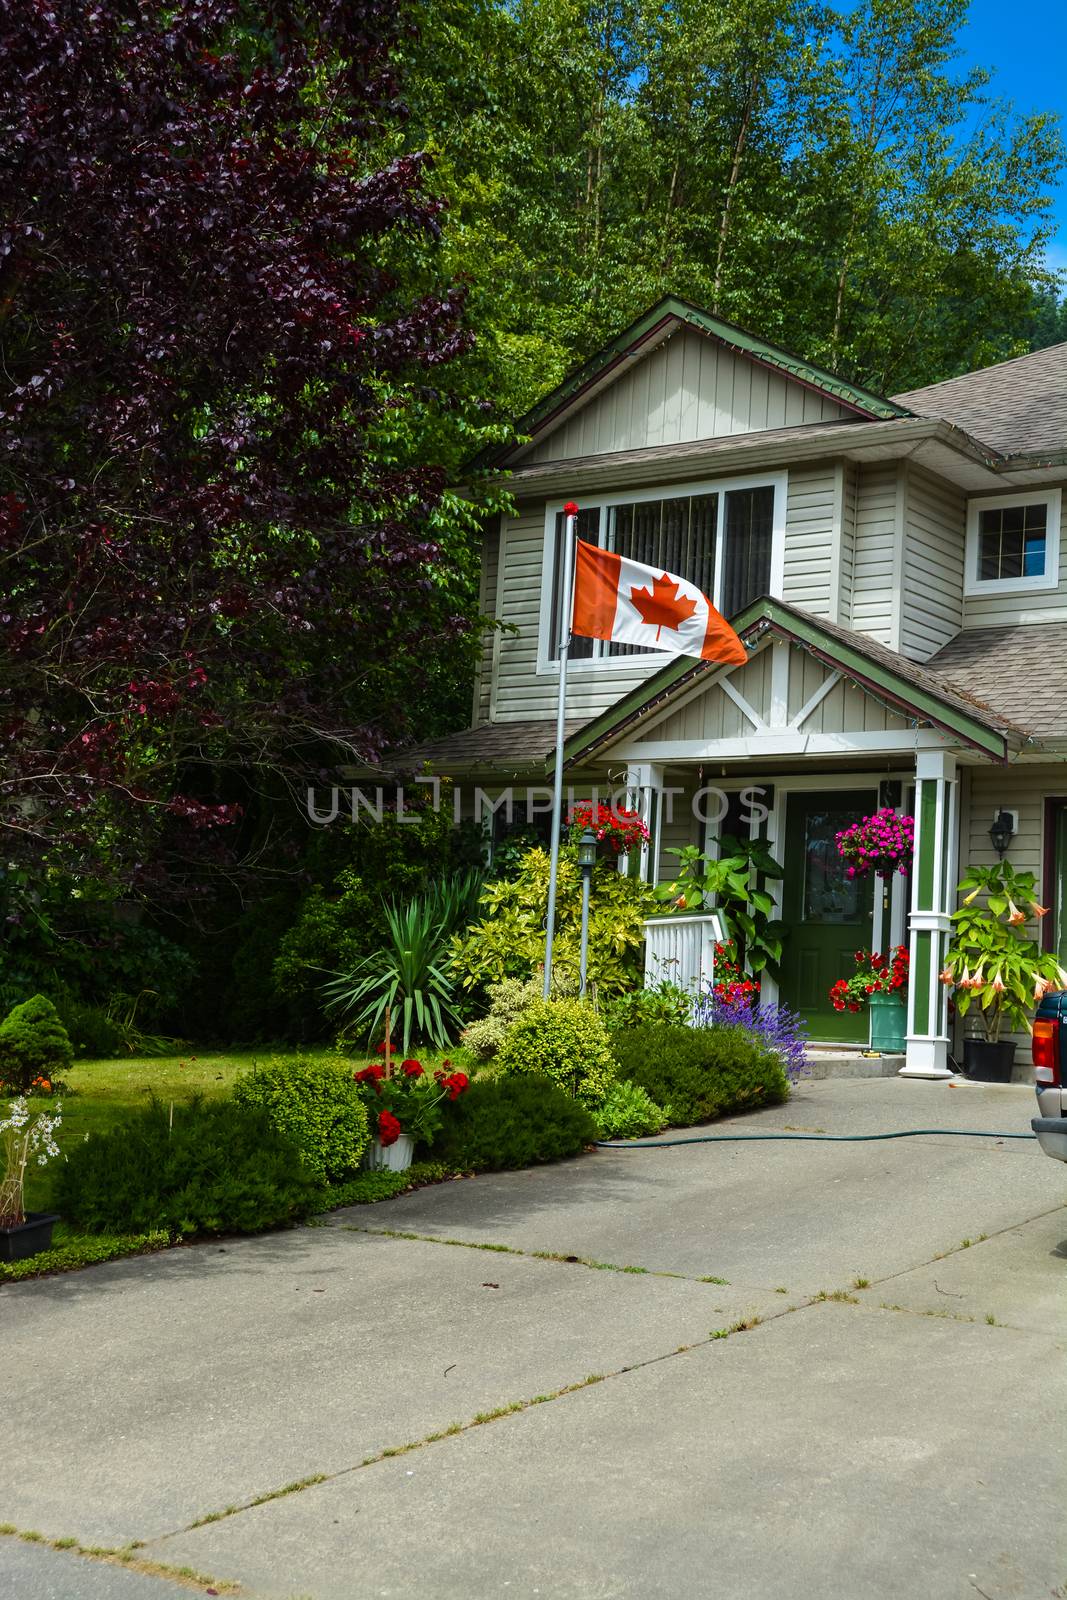 Main entrance of family house with canadian flag in front. Fragment of residential house with concrete driveway